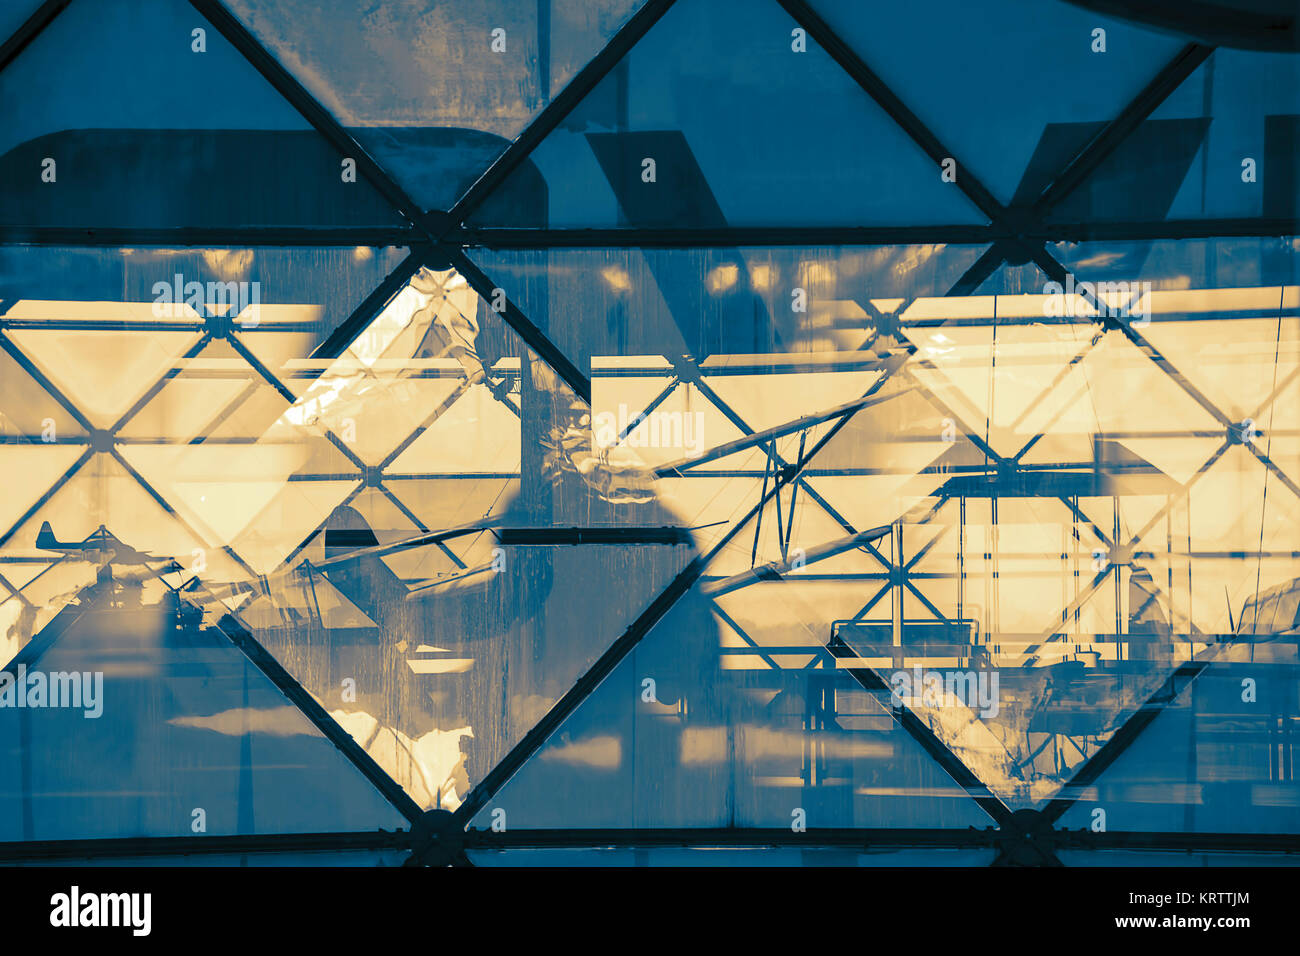 Abstract view through the triangular glass structure with reflection Stock Photo